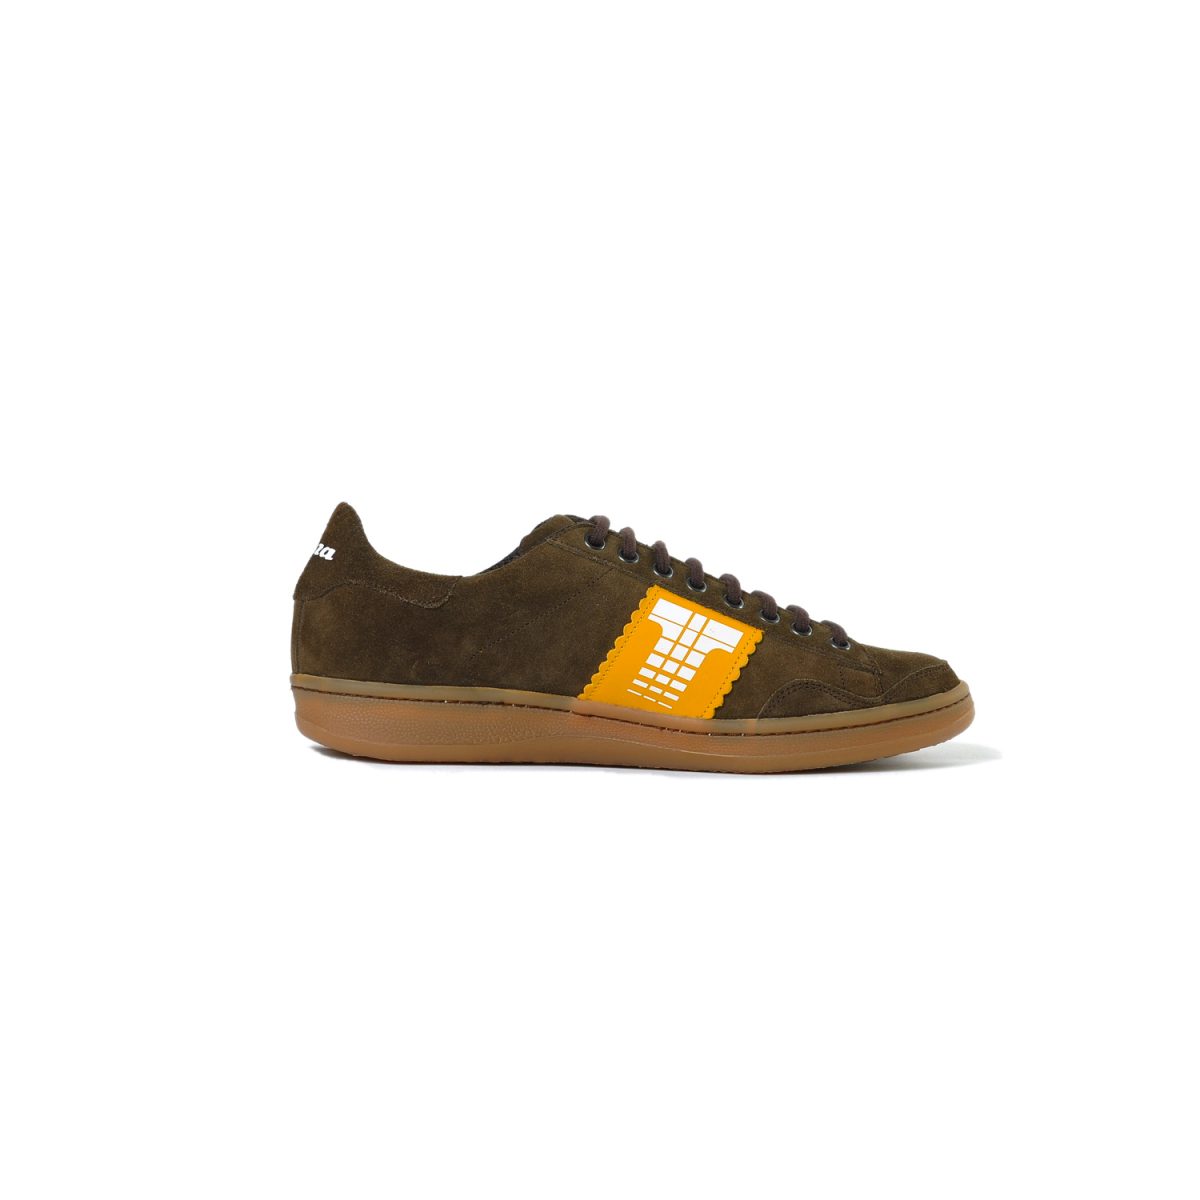 Tisza shoes - Derby - Brown-yellow